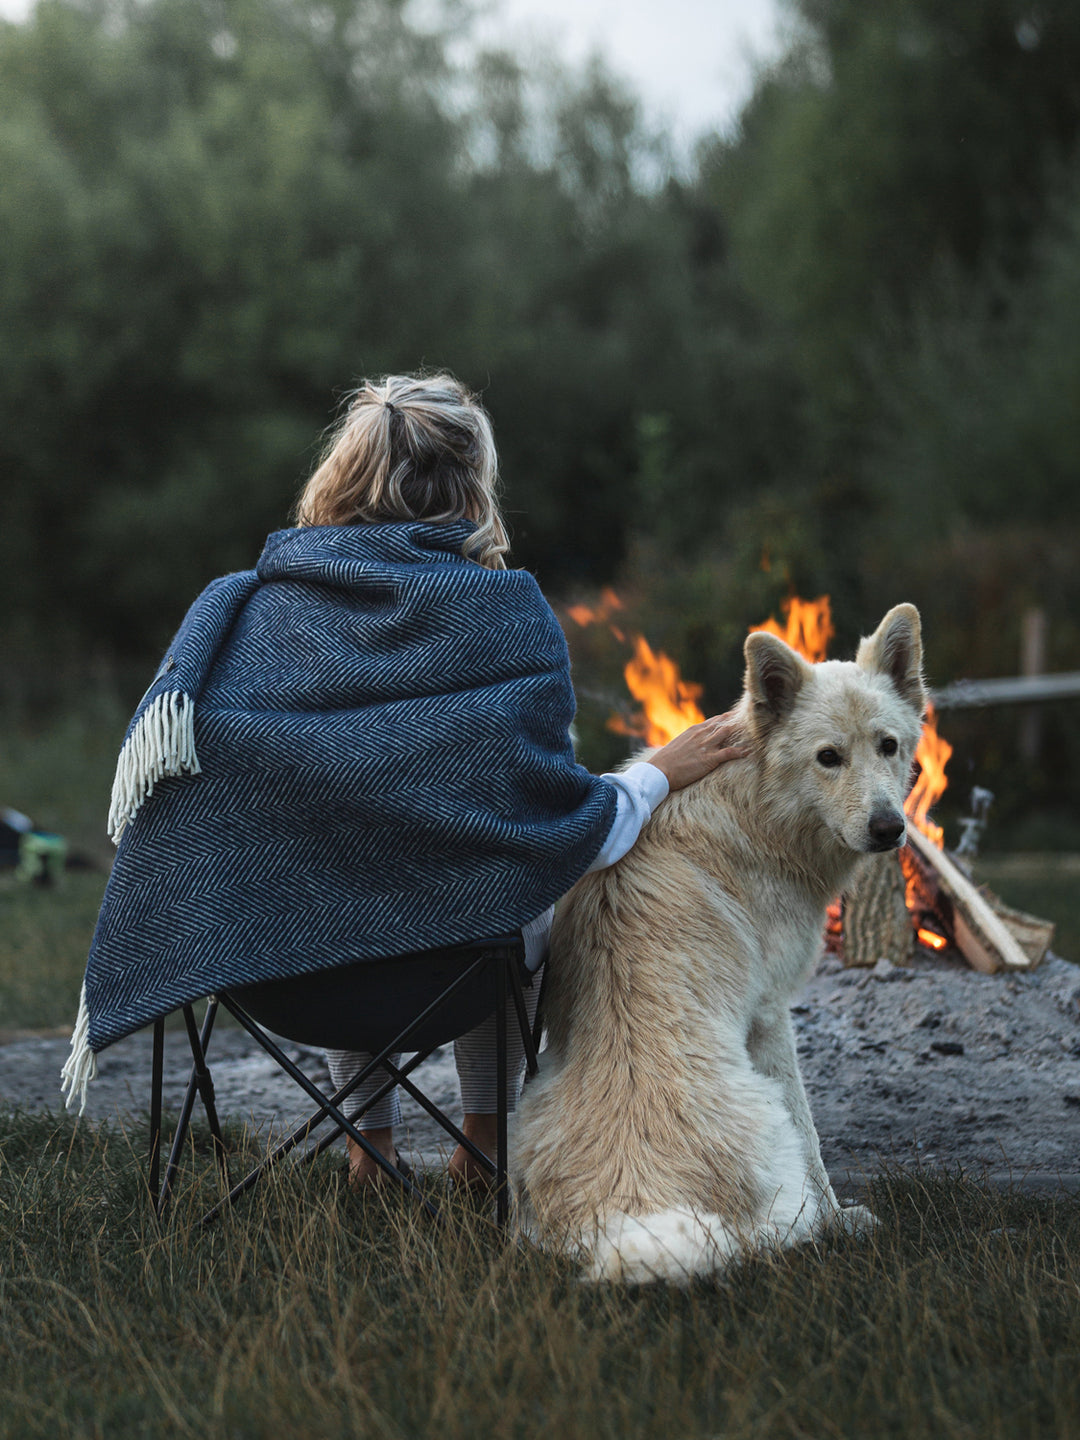 A woman wrapped with an extra large blue herringbone throw. She is sitting down facing a firepit next to a dog